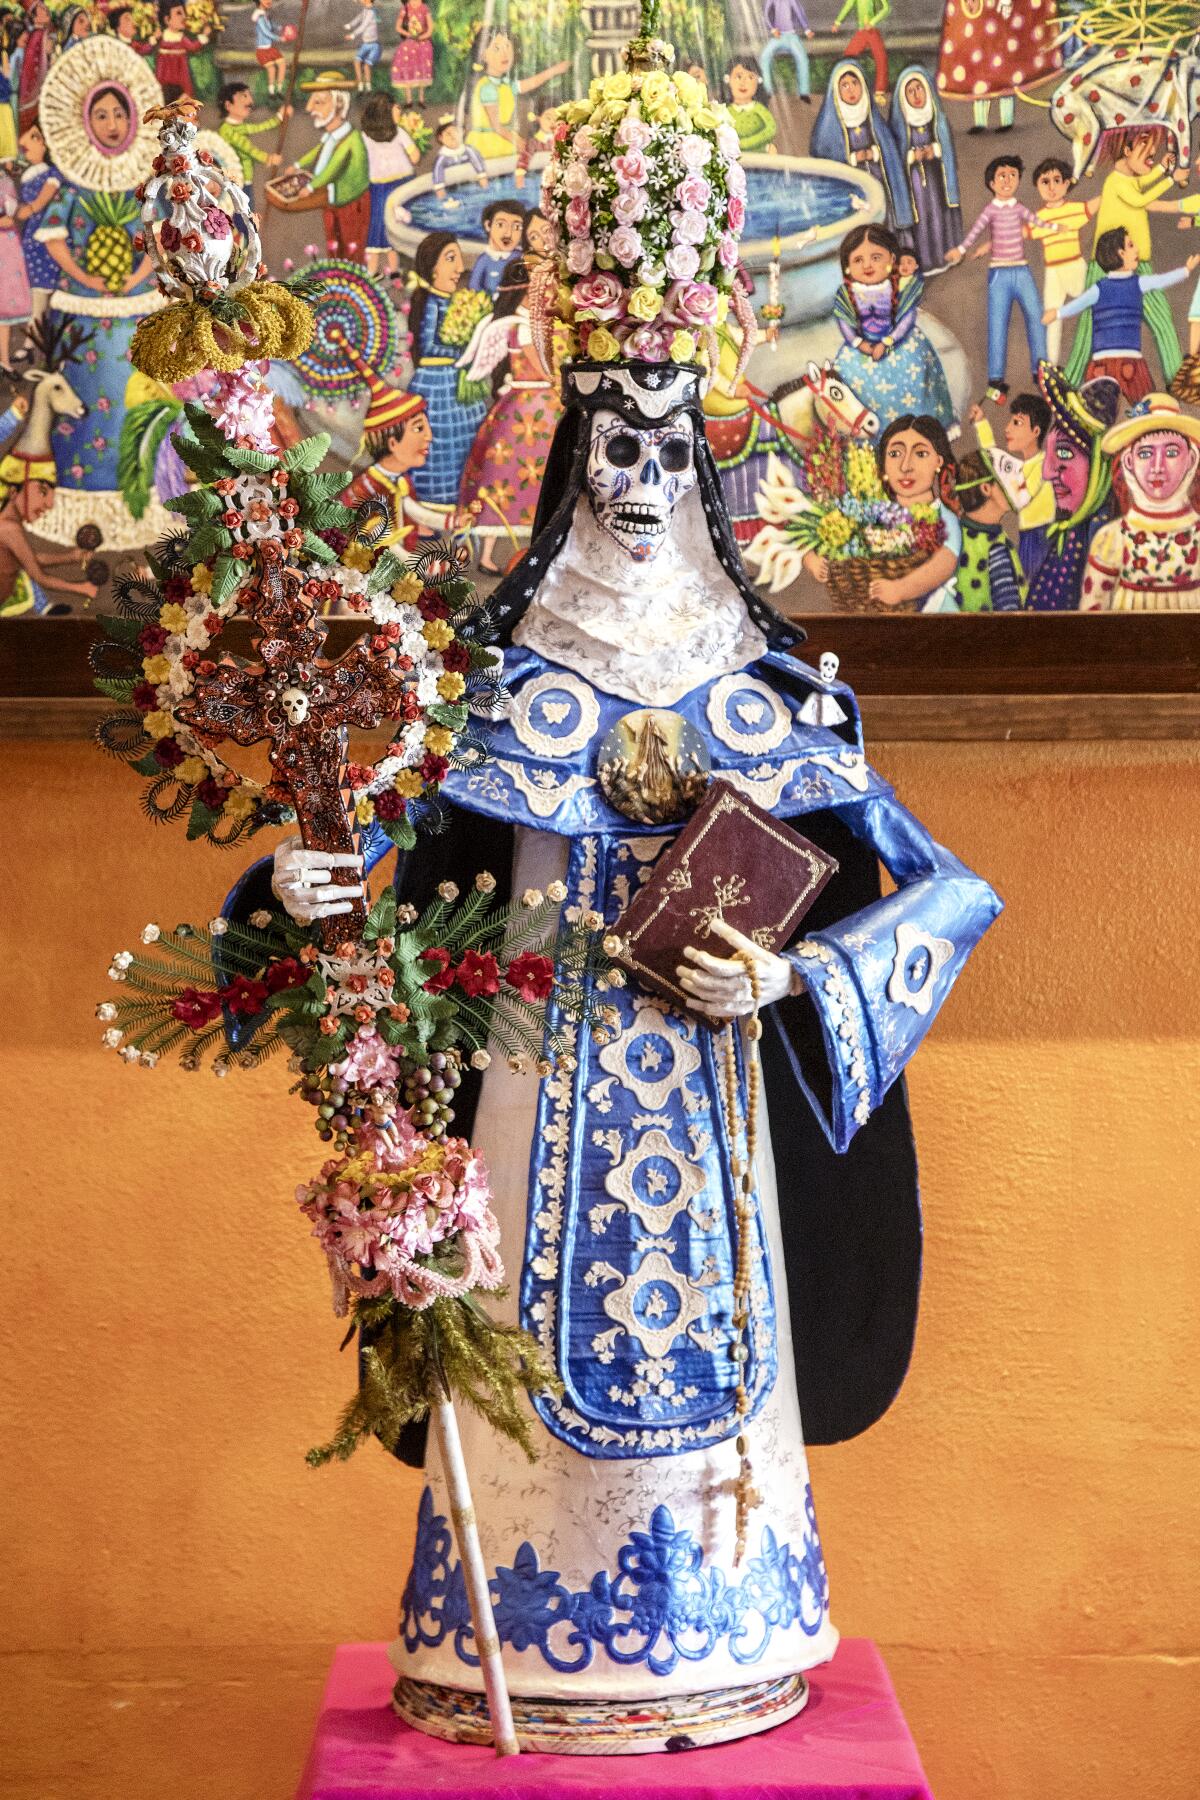 A holy figure with an elaborately decorated cross and Bible.